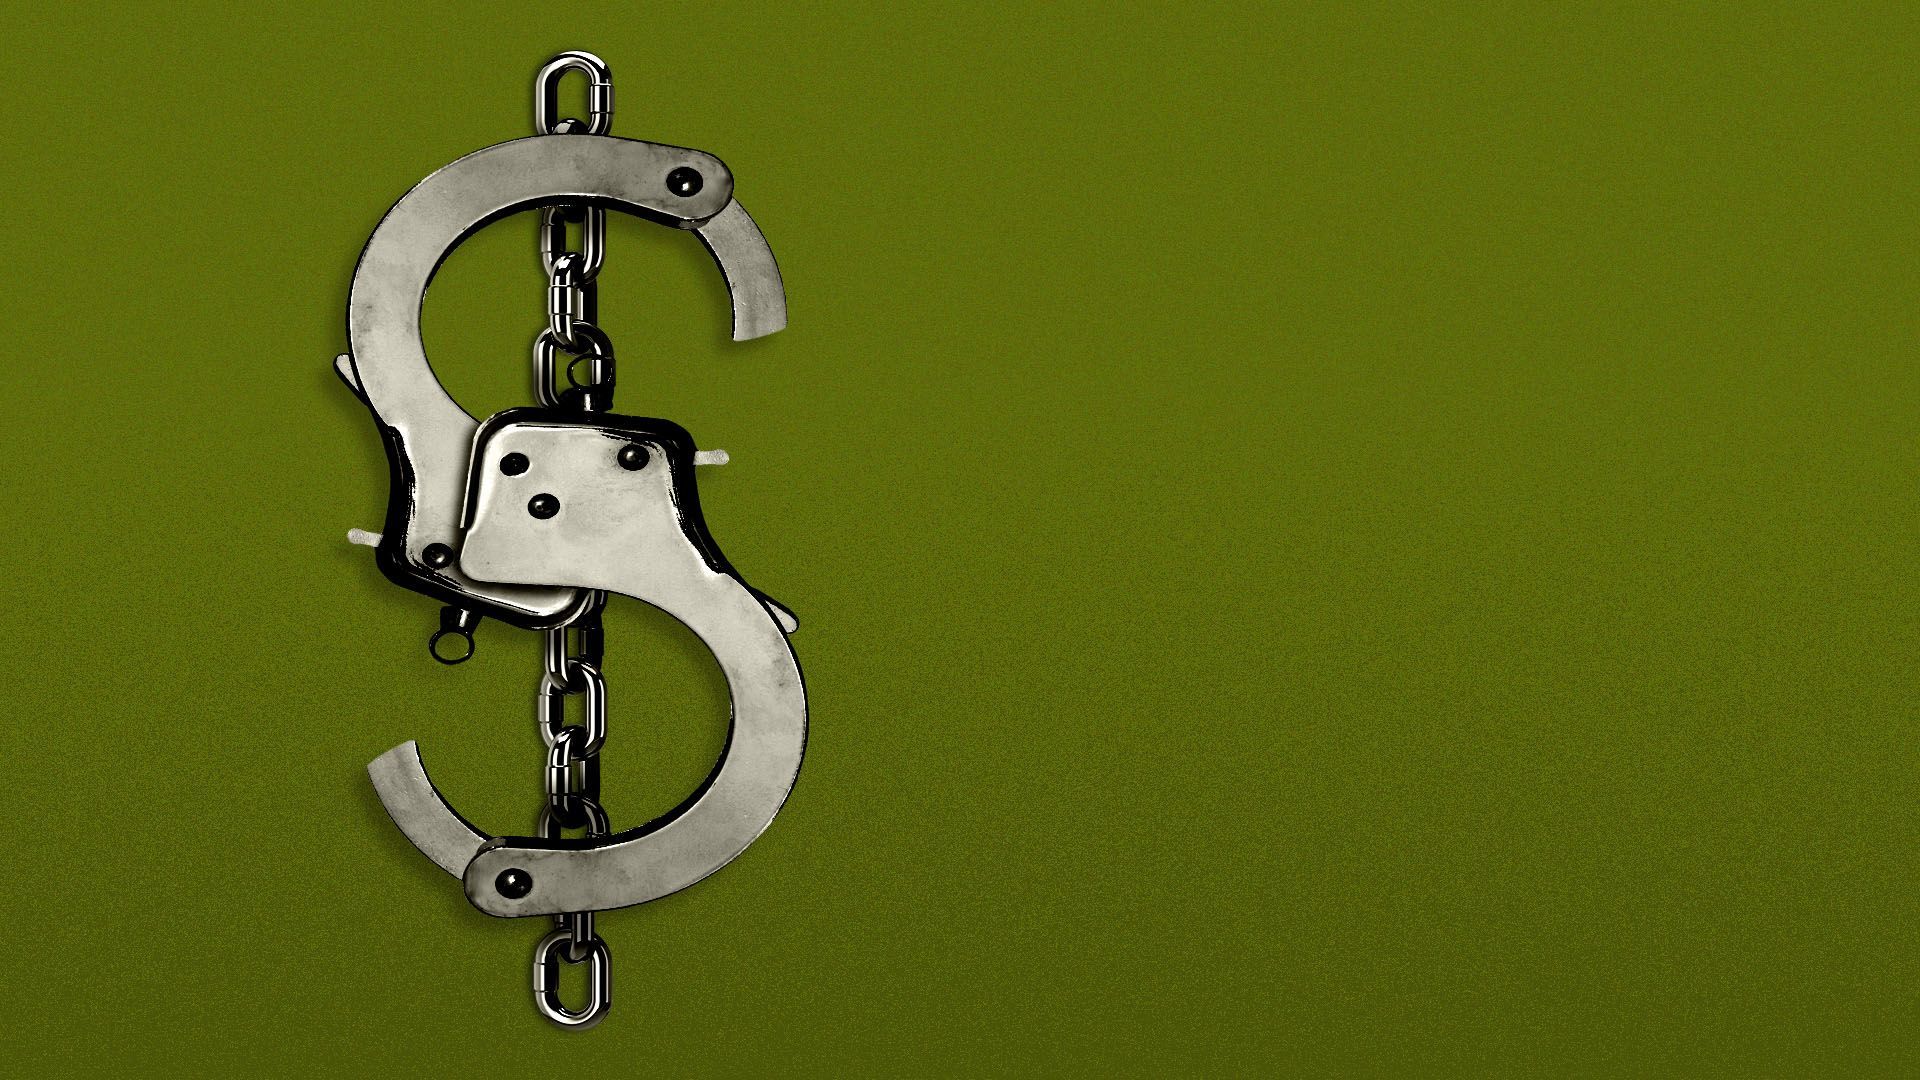 Illustration of a pair of handcuffs in the shape of a dollar sign.